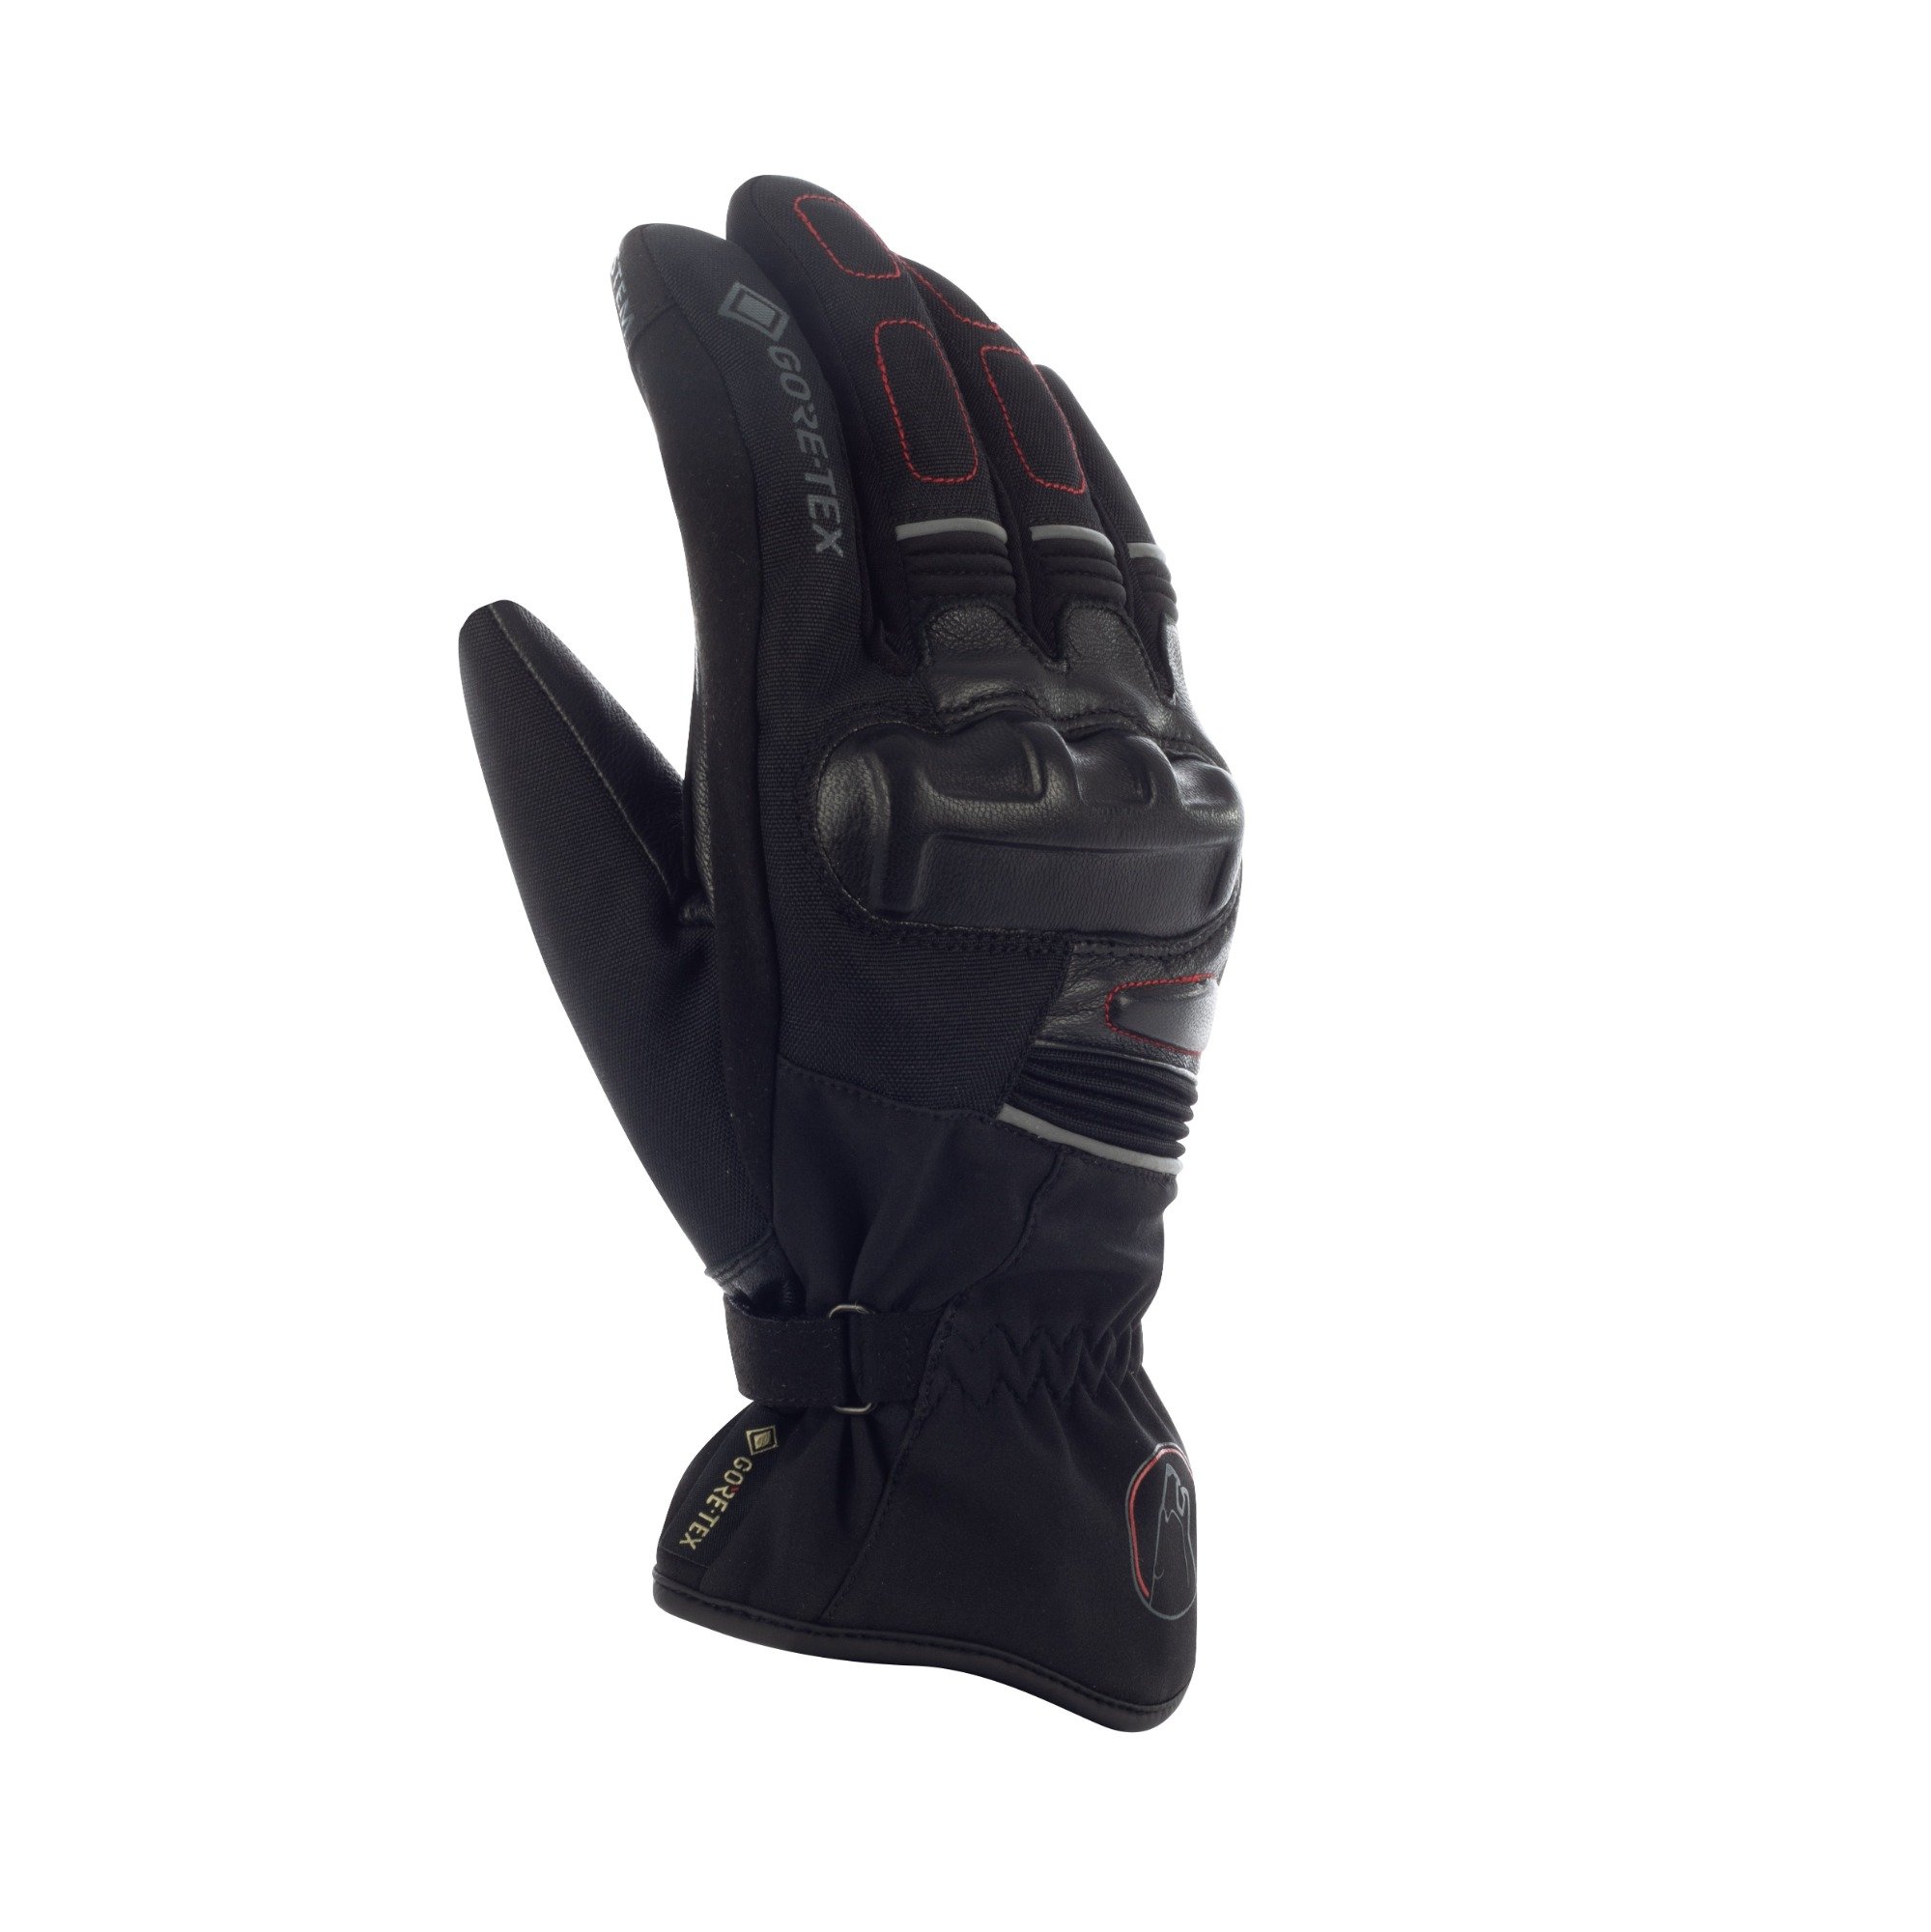 Image of Bering Punch GTX Gloves Black Size T12 ID 3660815172087